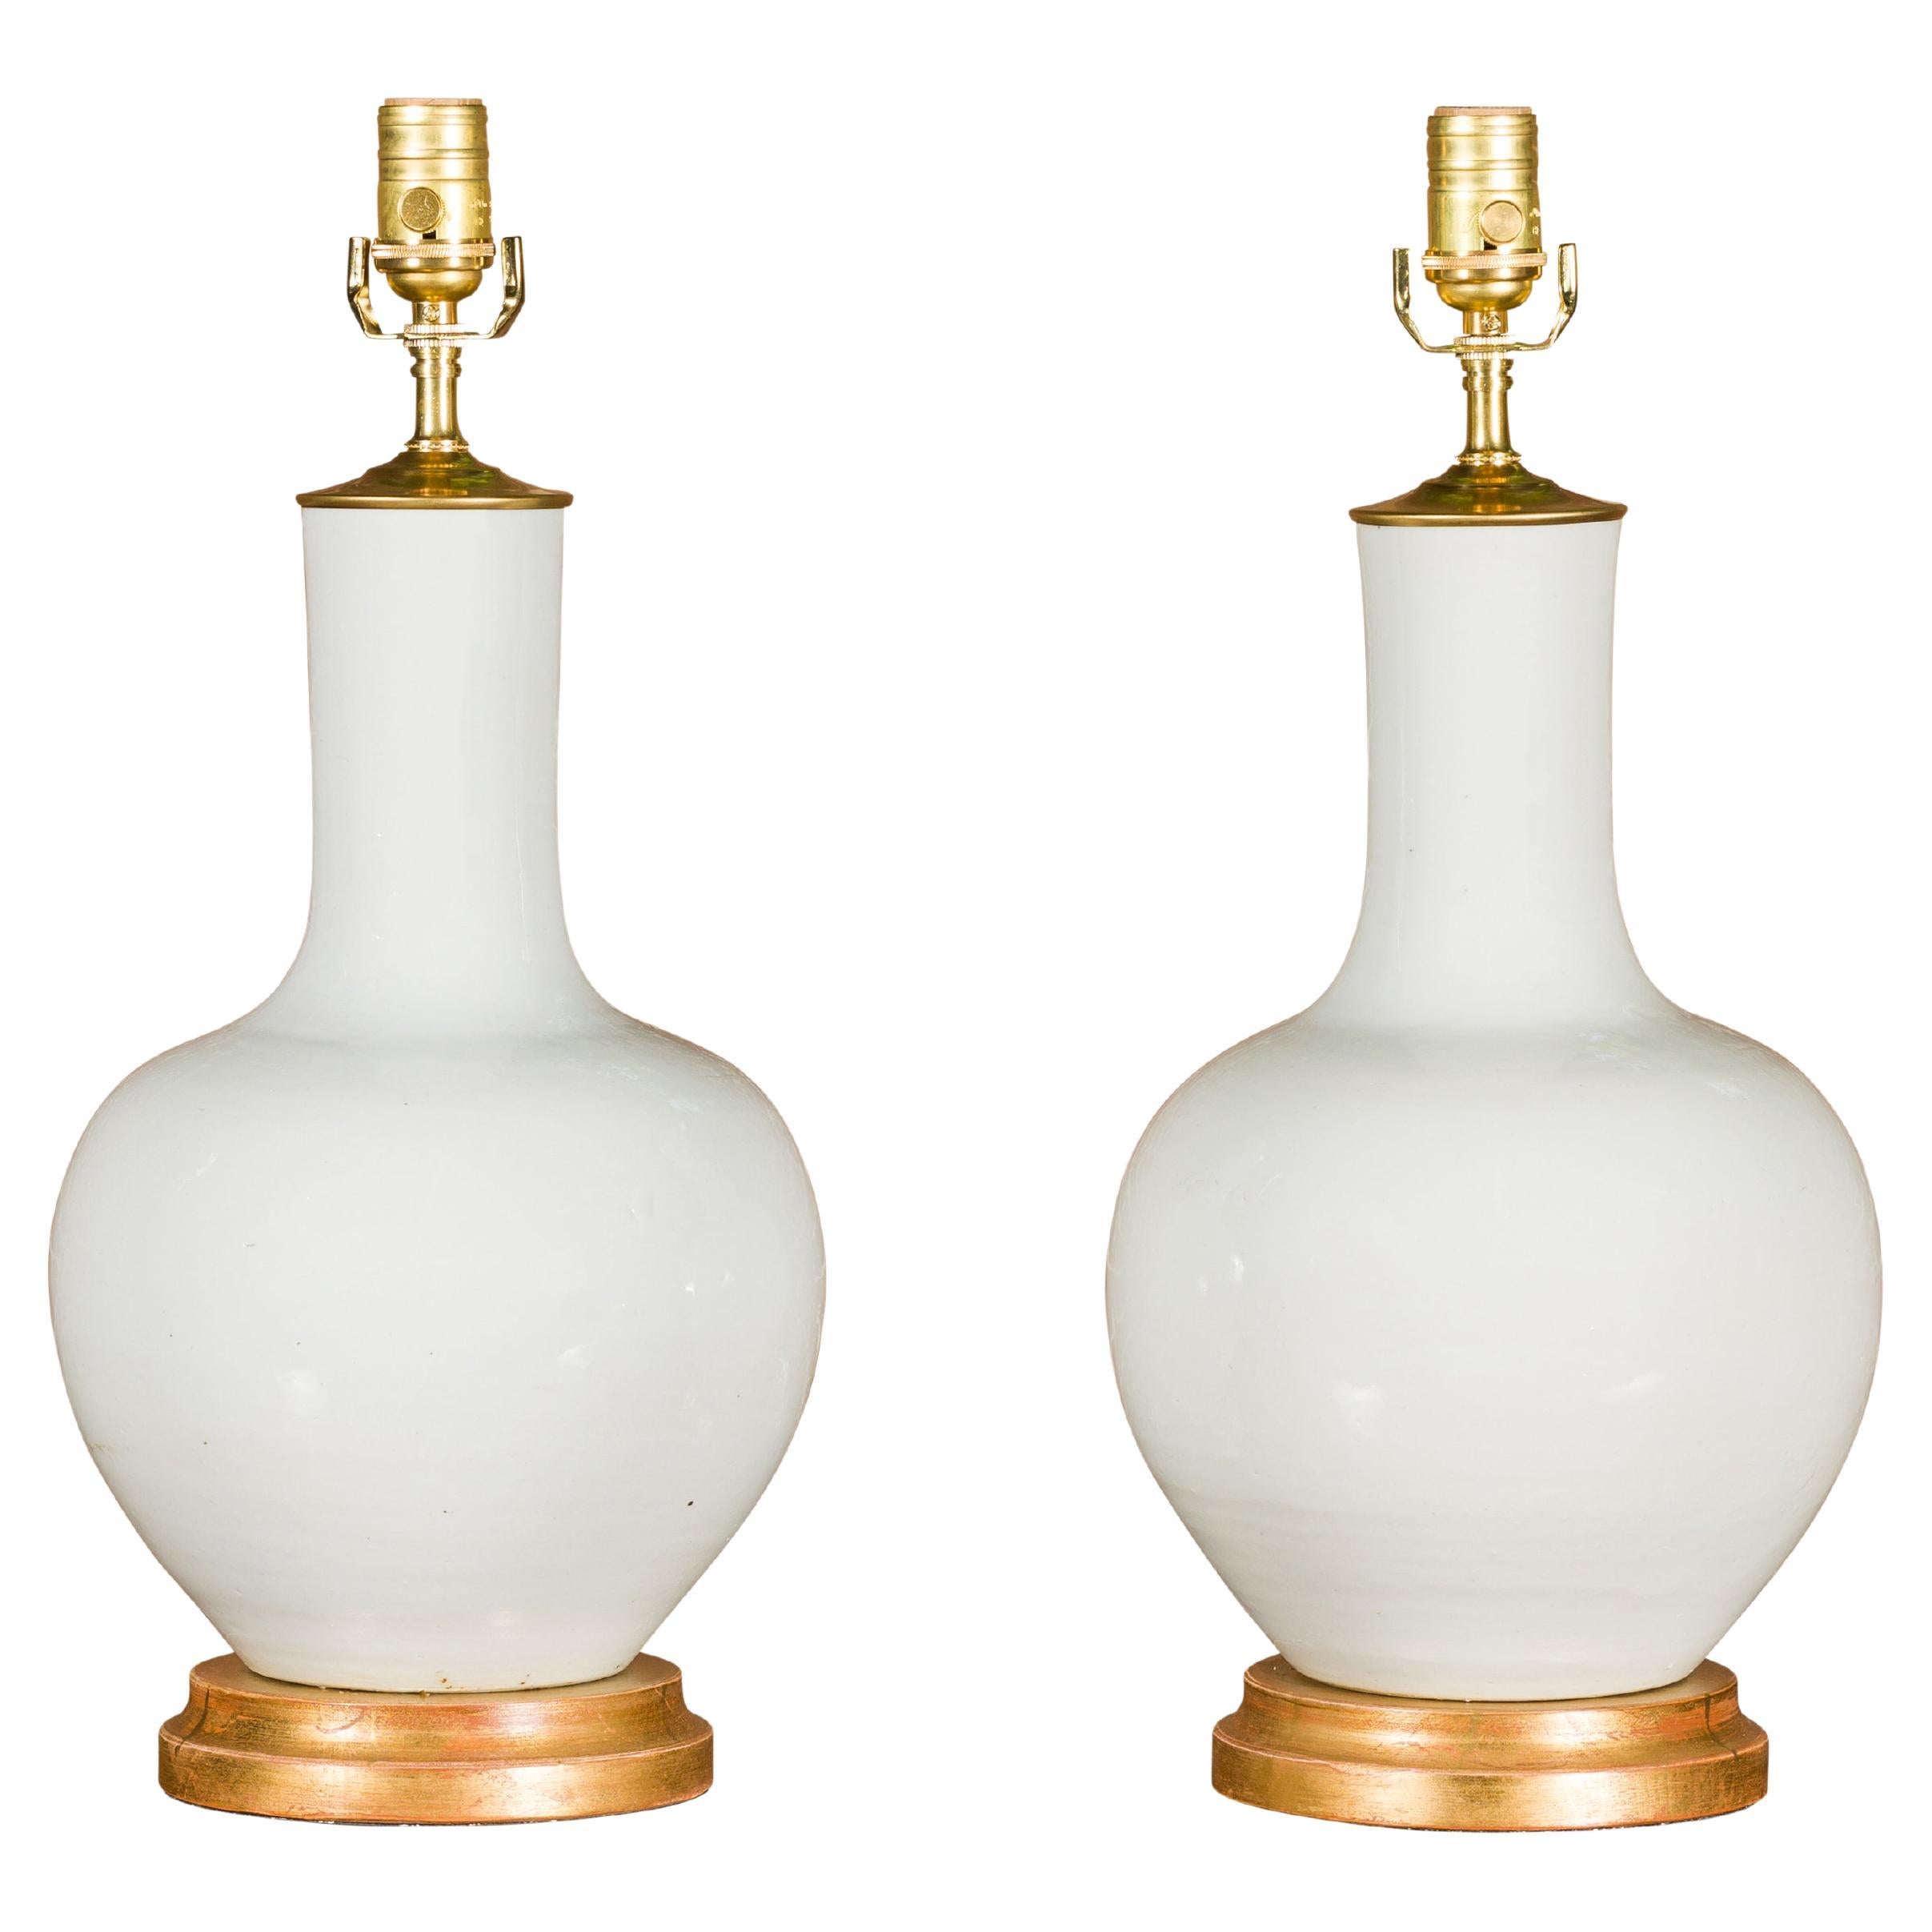 White Porcelain Vases Made into Wired Table Lamps on Giltwood Bases, a Pair For Sale